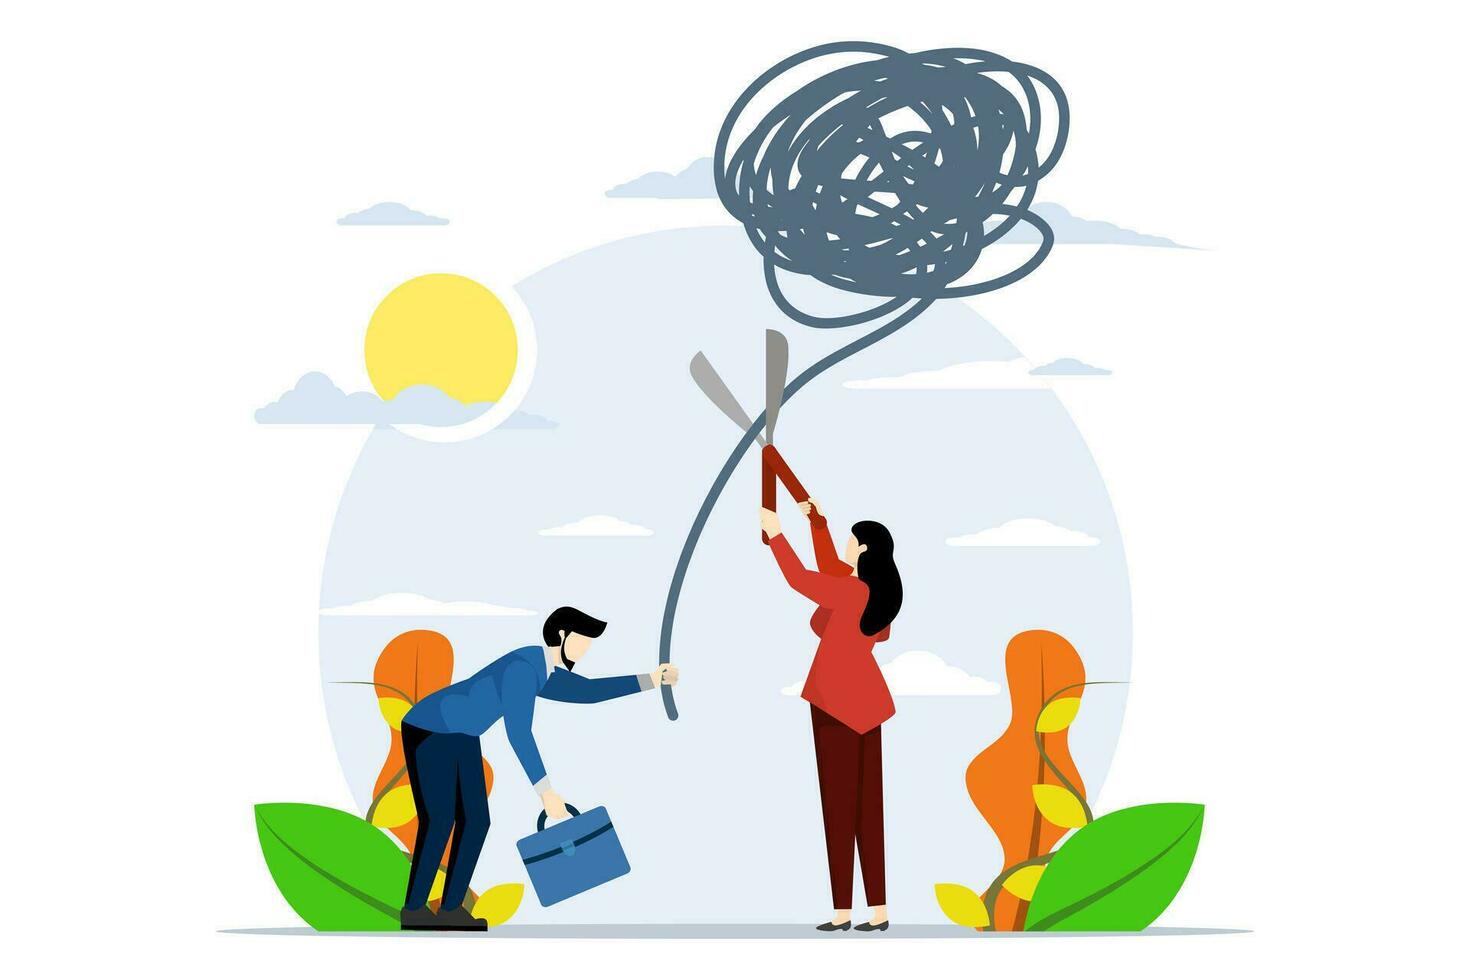 Psychologist uses scissors to cut messy balloons on patient. anxiety or stress, psychotherapy to cure mental health problems or depression, relaxation or relief to heal. flat vector illustration.